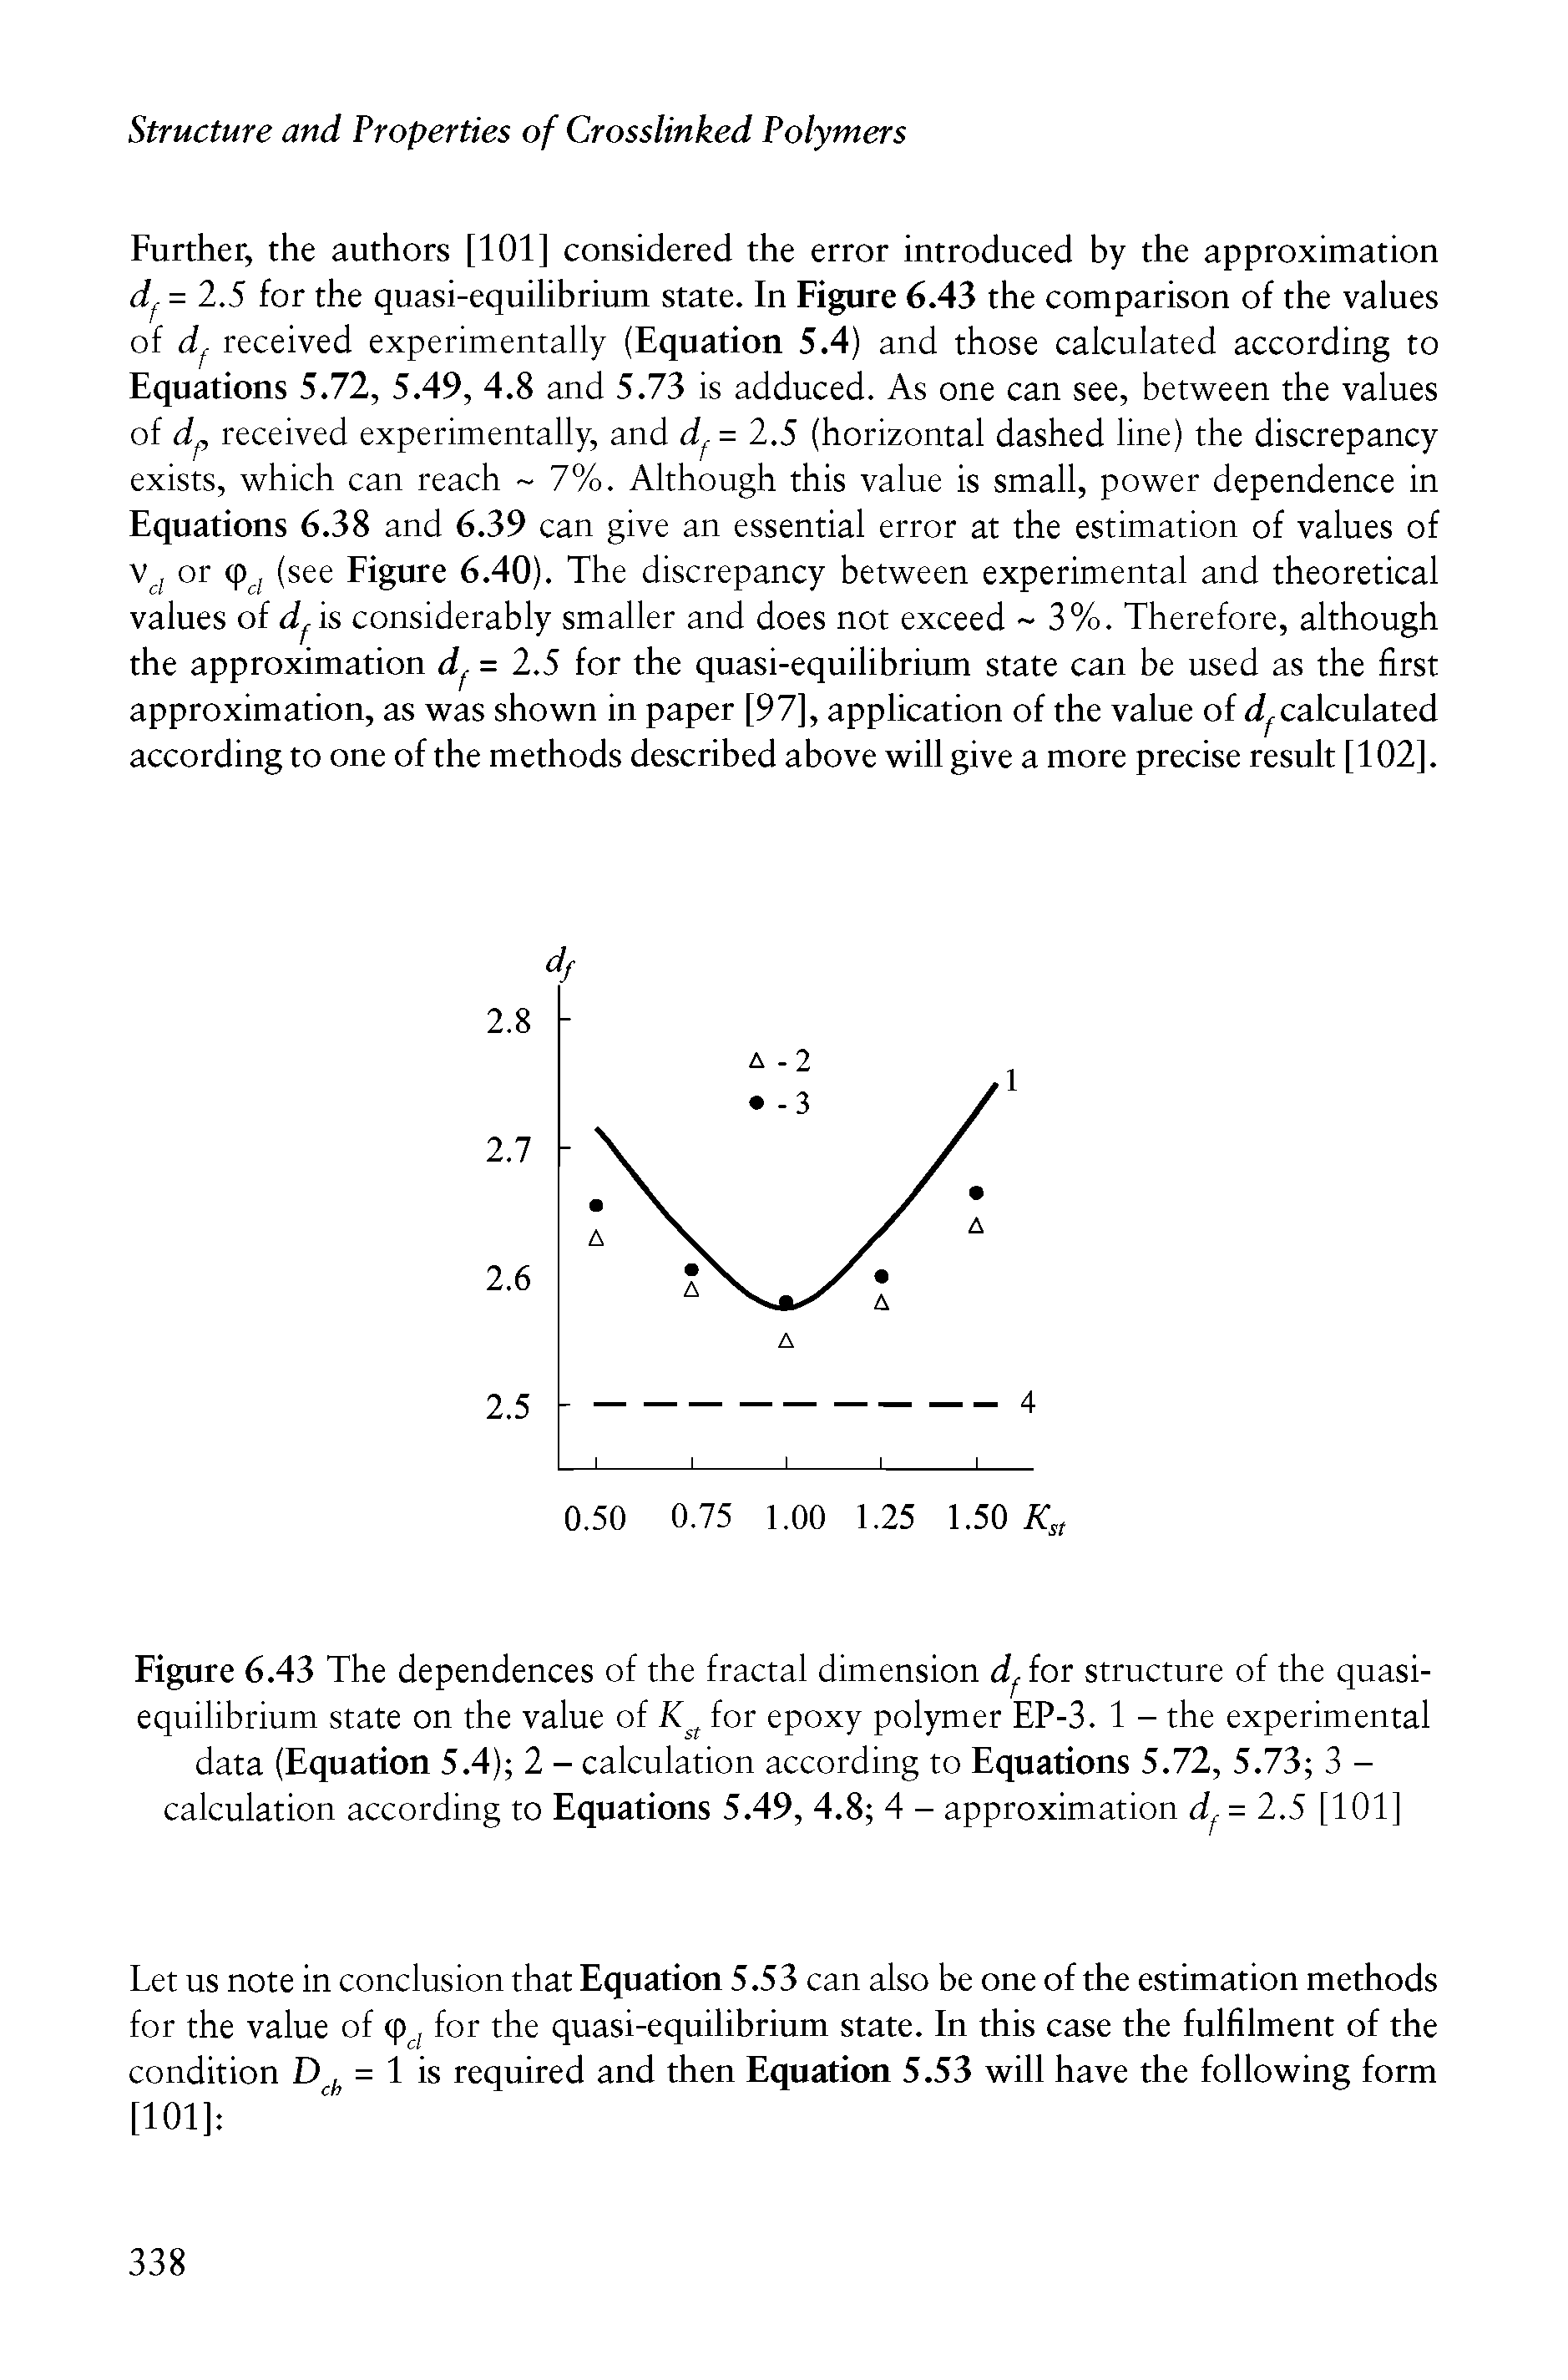 Figure 6.43 The dependences of the fractal dimension d for structure of the quasiequilibrium state on the value of for epoxy polymer EP-3. 1 - the experimental data (Equation 5.4) 2 - calculation according to Equations 5.72, 5.73 3 -calculation according to Equations 5.49, 4.8 4 - approximation d = 2.5 [101]...